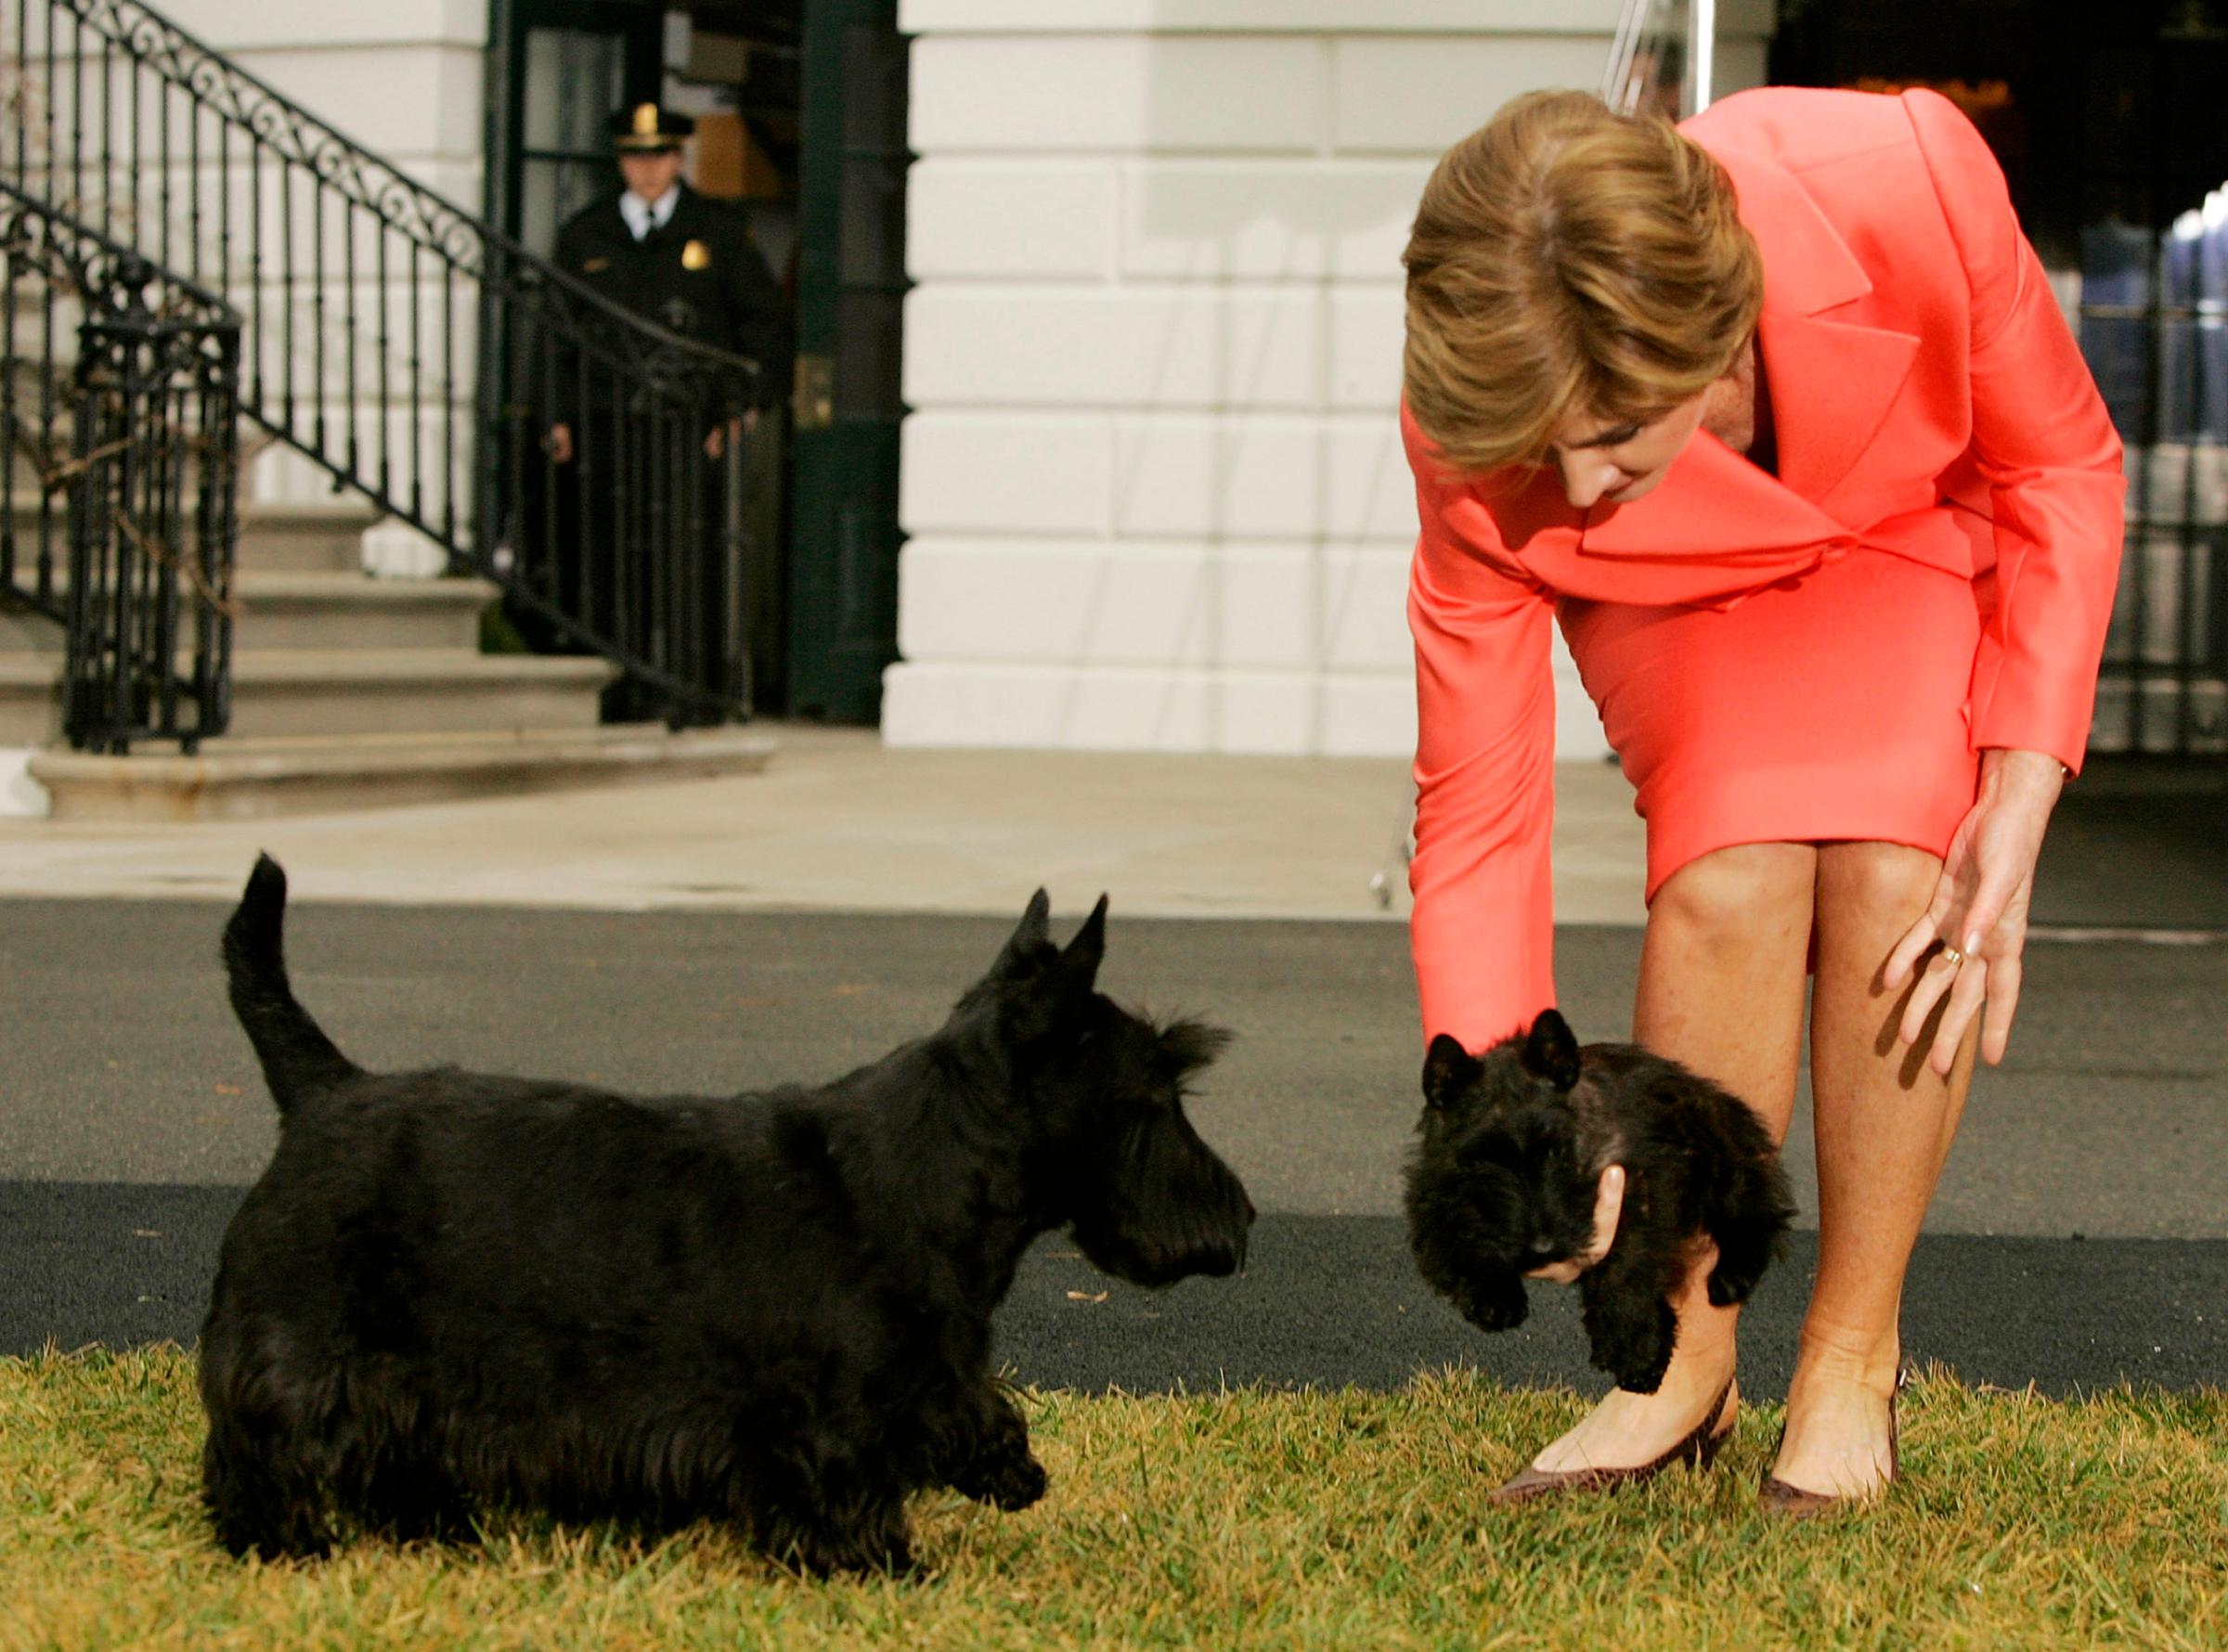 Presidential dog Barney prepares to acquaint himself with Miss Beazley, the Scottish Terrier pup given to First Lady, Laura Bush, as a birthday present by George W. Bush, during an event at the White House January 6, 2005. The dog was named for the character Uncle Beazley, a dinosaur in Oliver Butterworth's children's book, "The Enormous Egg."